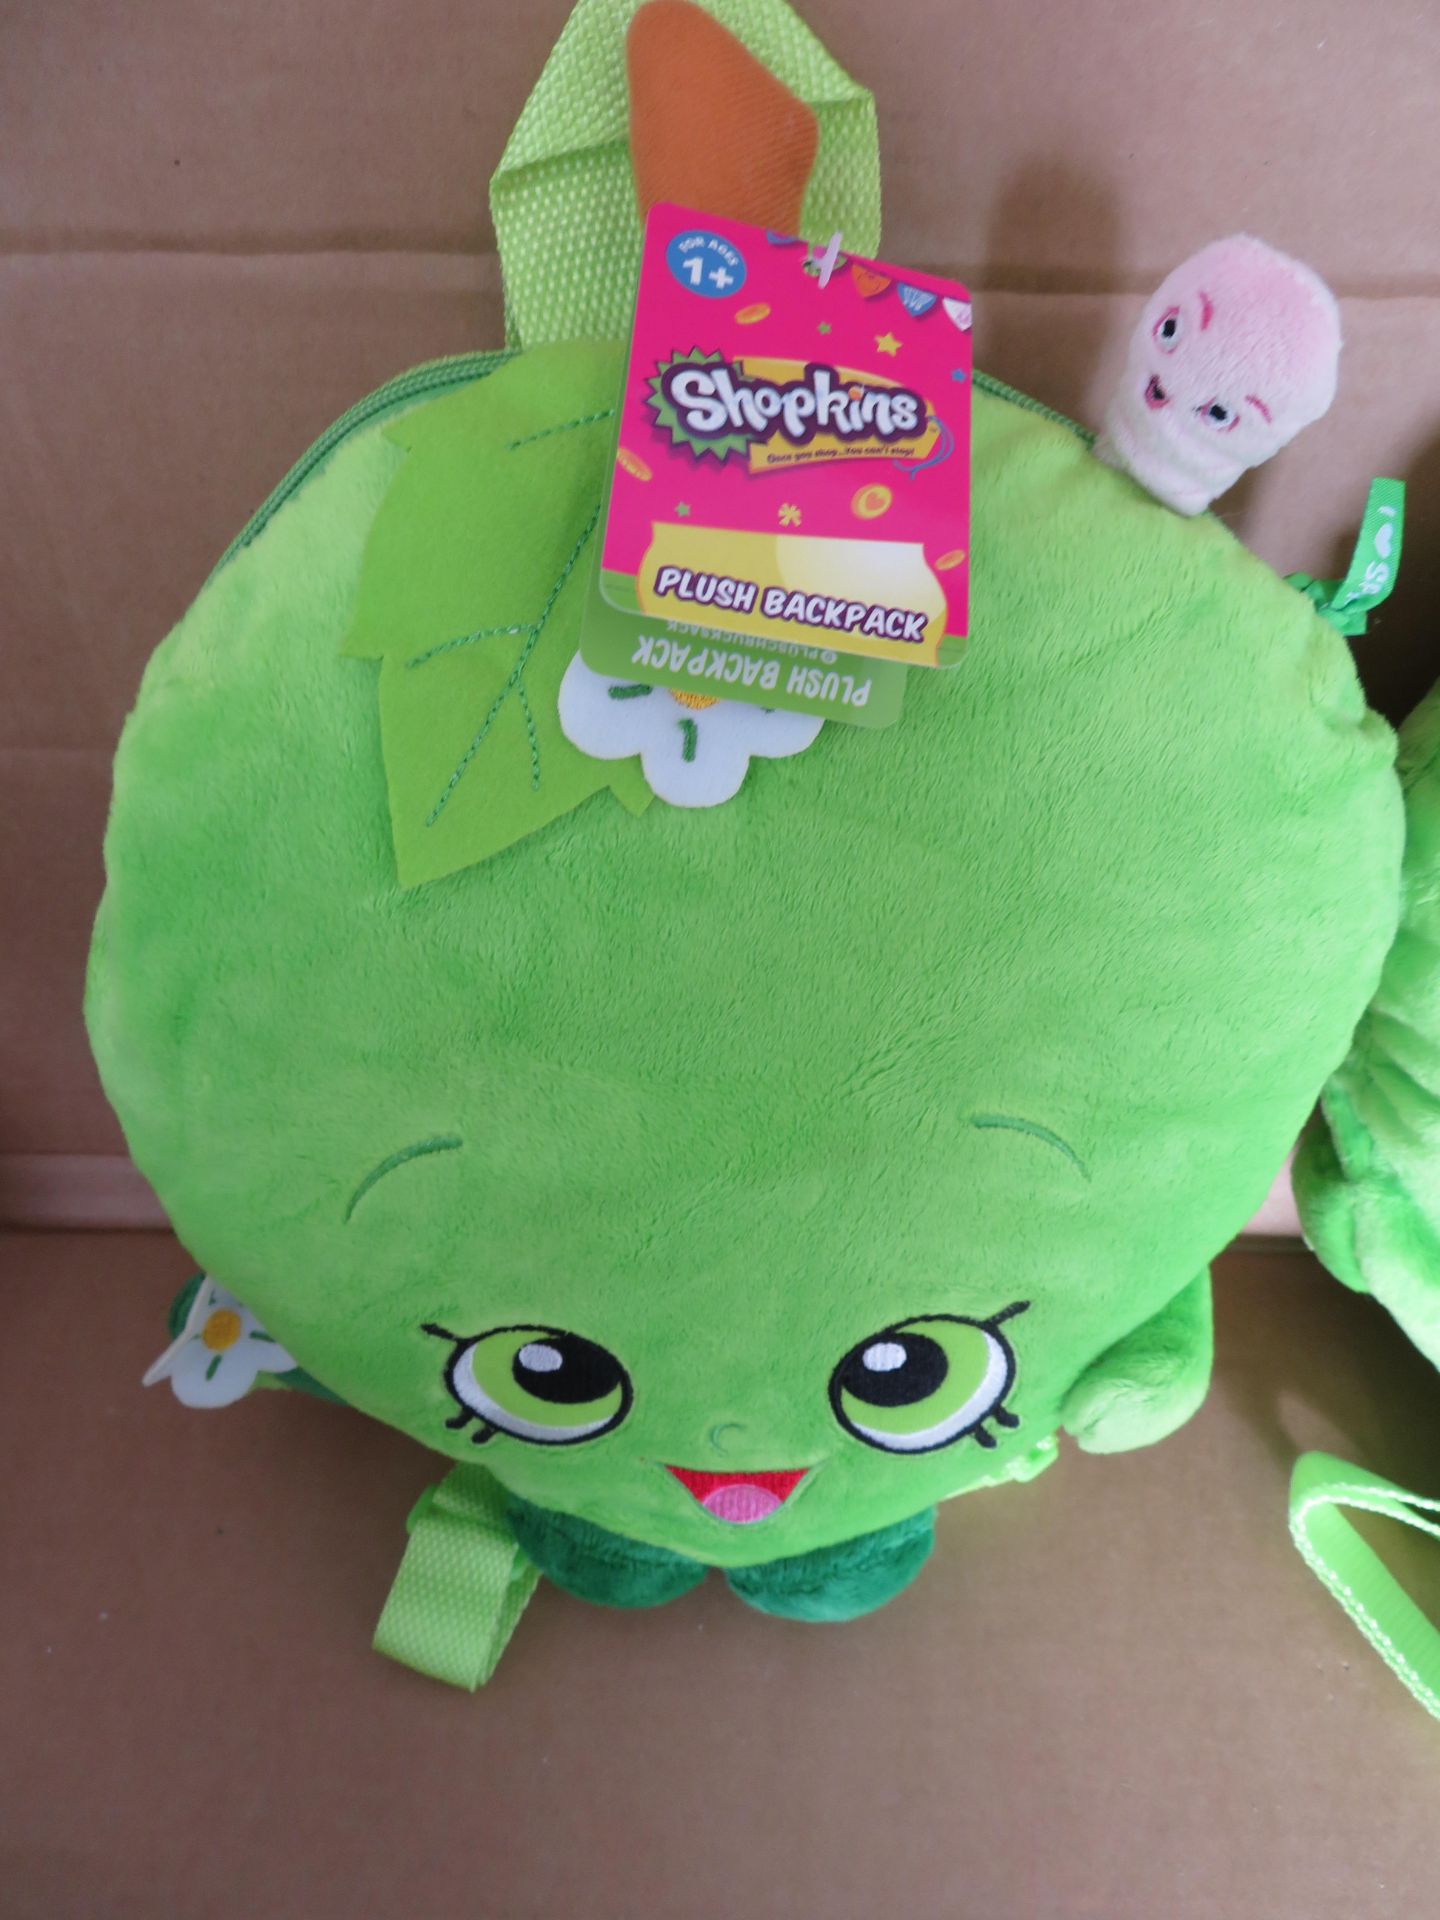 20 x Brand New Shopkins Apple Plush Back Pack's. RRP £19.99 each - giving this lot total original - Image 2 of 2